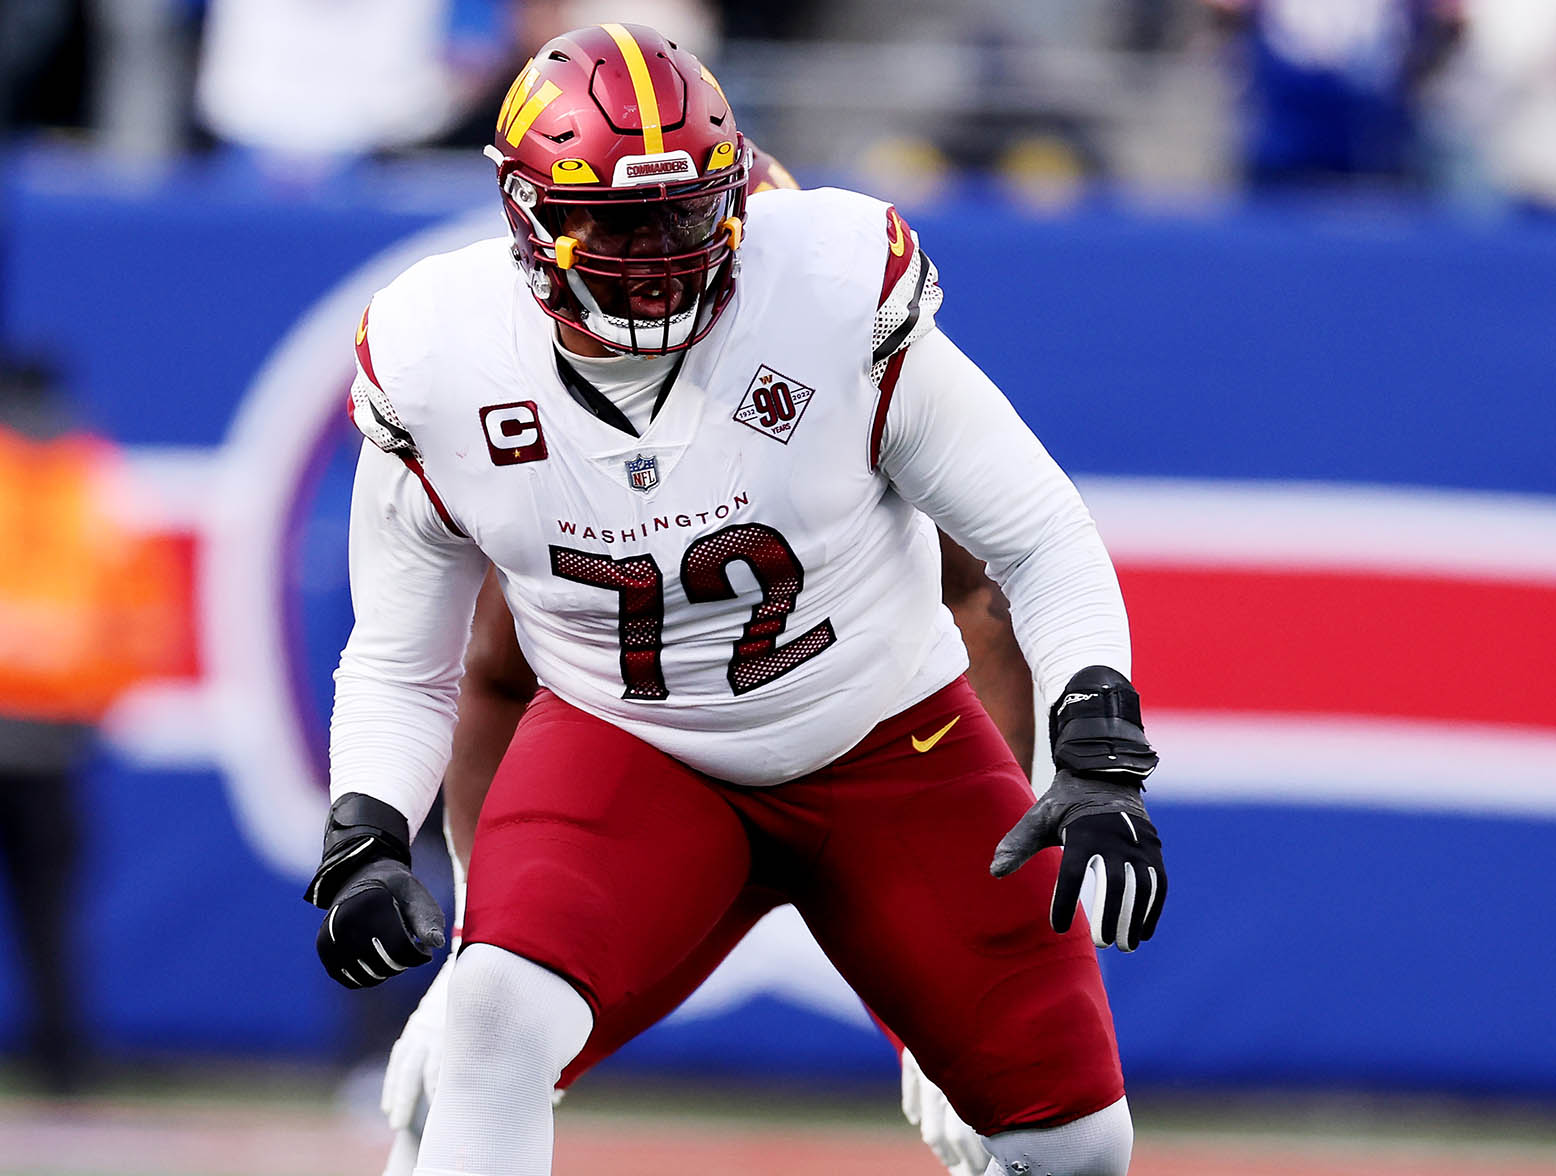 EAST RUTHERFORD, NEW JERSEY - DECEMBER 04: Charles Leno Jr. #72 of the Washington Commanders in action against the Washington Commanders during their game at MetLife Stadium on December 04, 2022 in East Rutherford, New Jersey. (Photo by Al Bello/Getty Images)